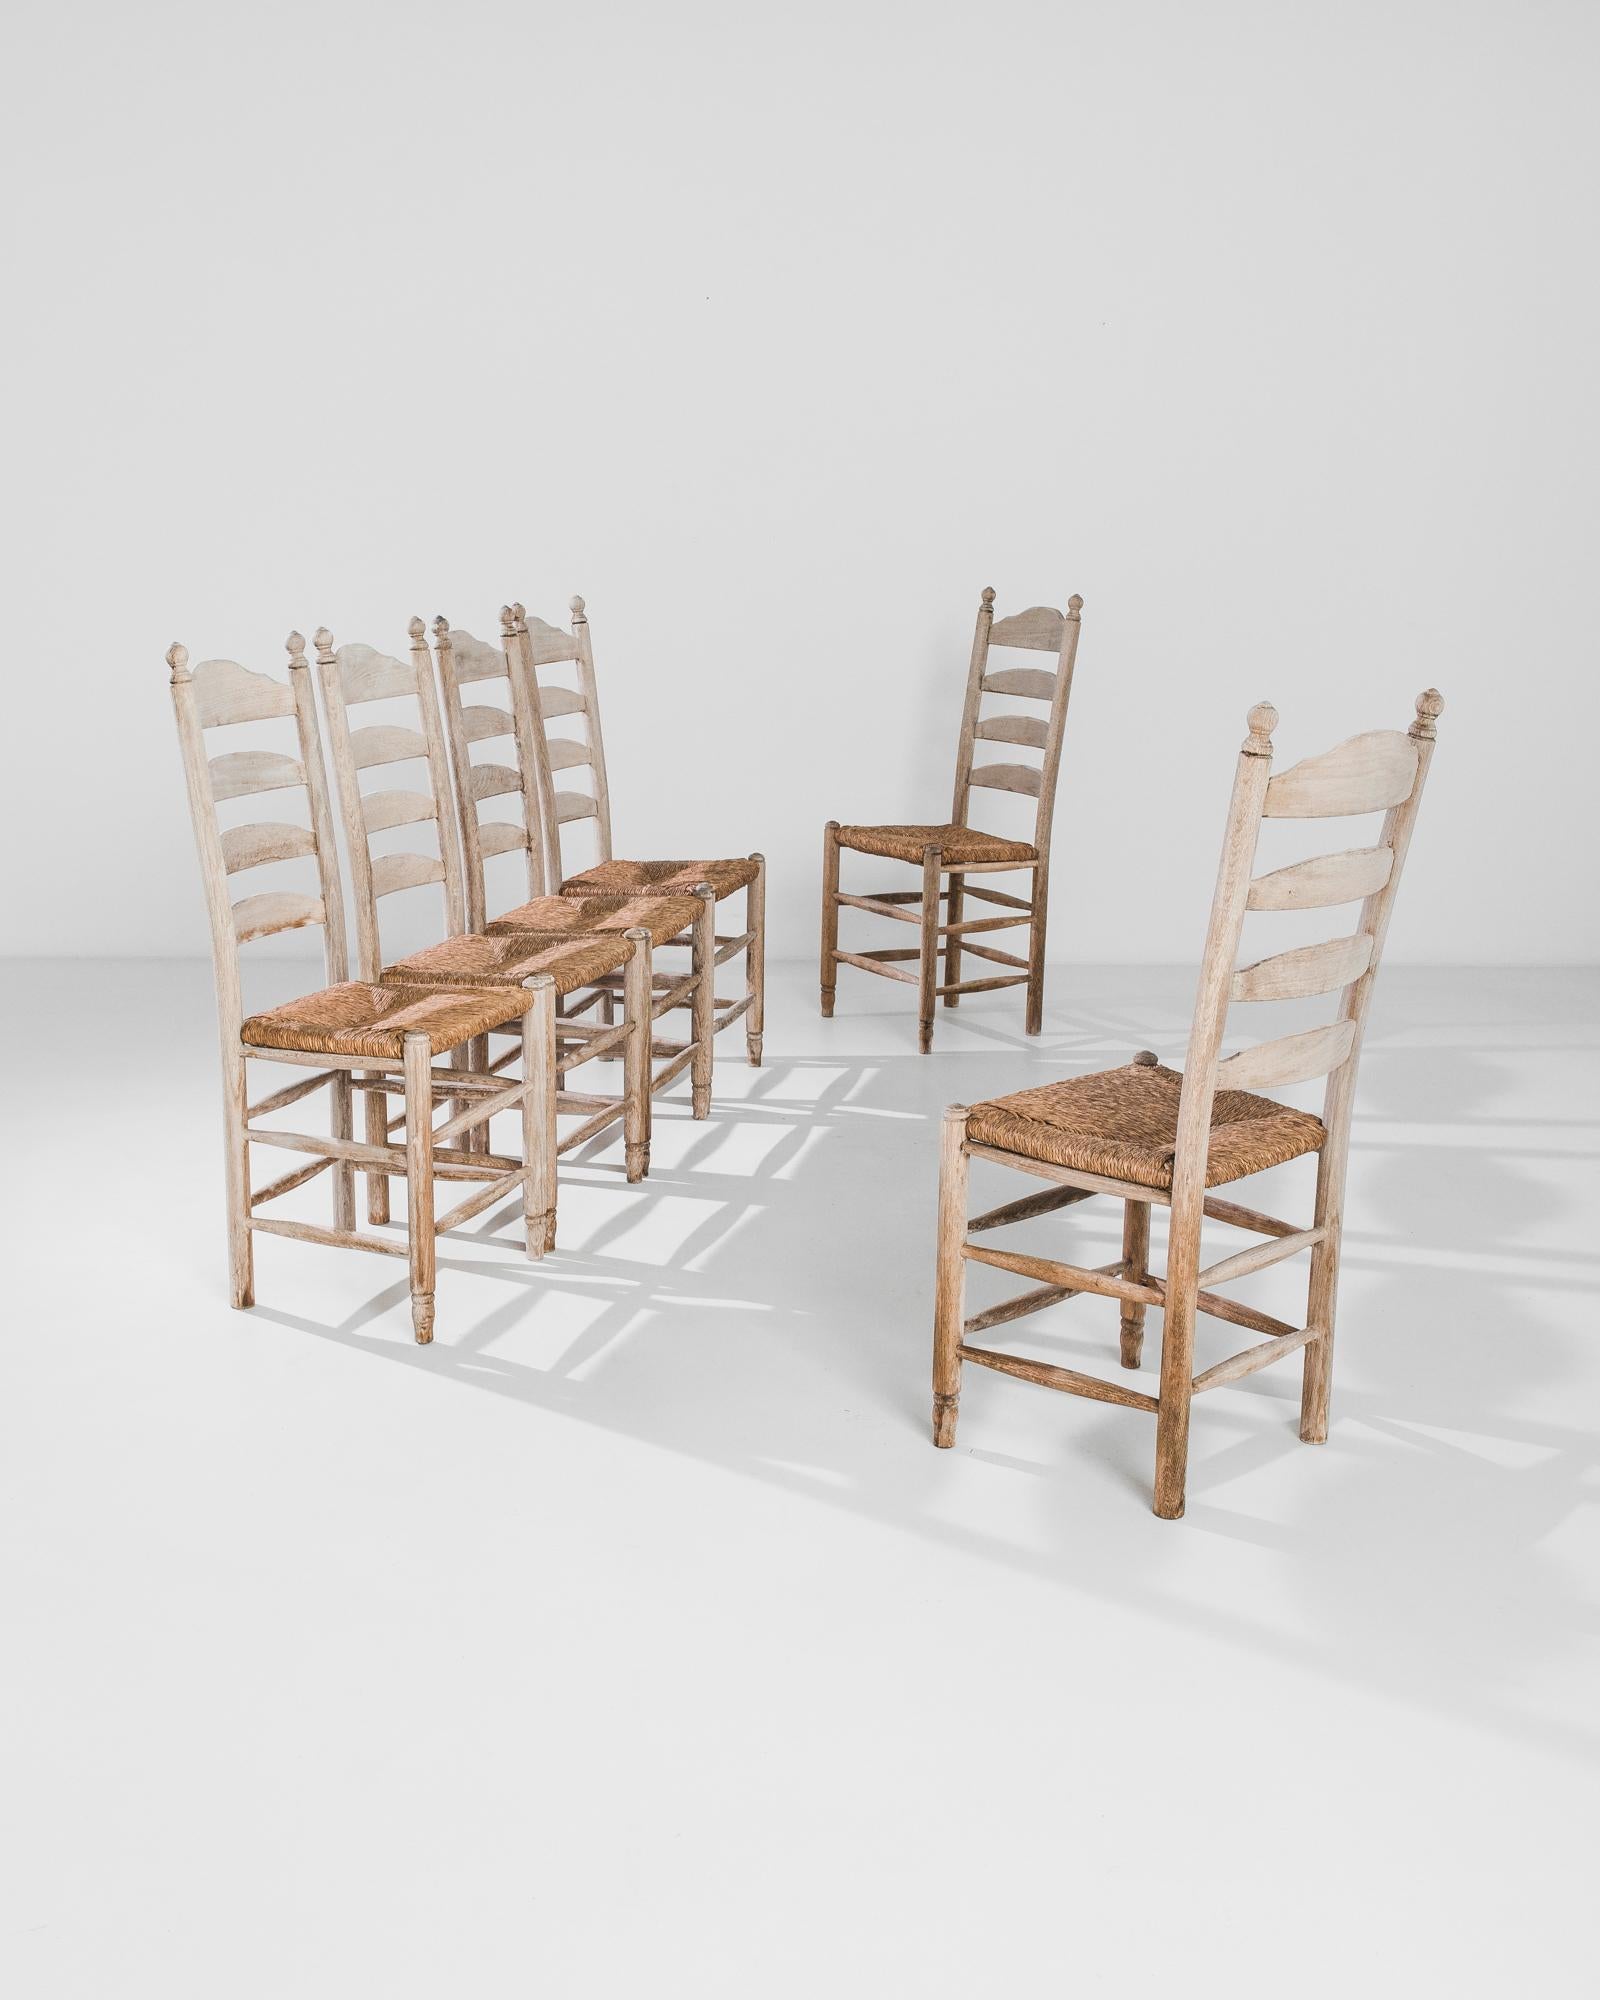 Simple but elegant, this set of dining chairs made in Belgium circa 1970 exudes the air of a cosy farmhouse. Excellent ladderbacks give the chairs an expressive silhouette, accentuated by singular detail – charming finials on the top. 

Another